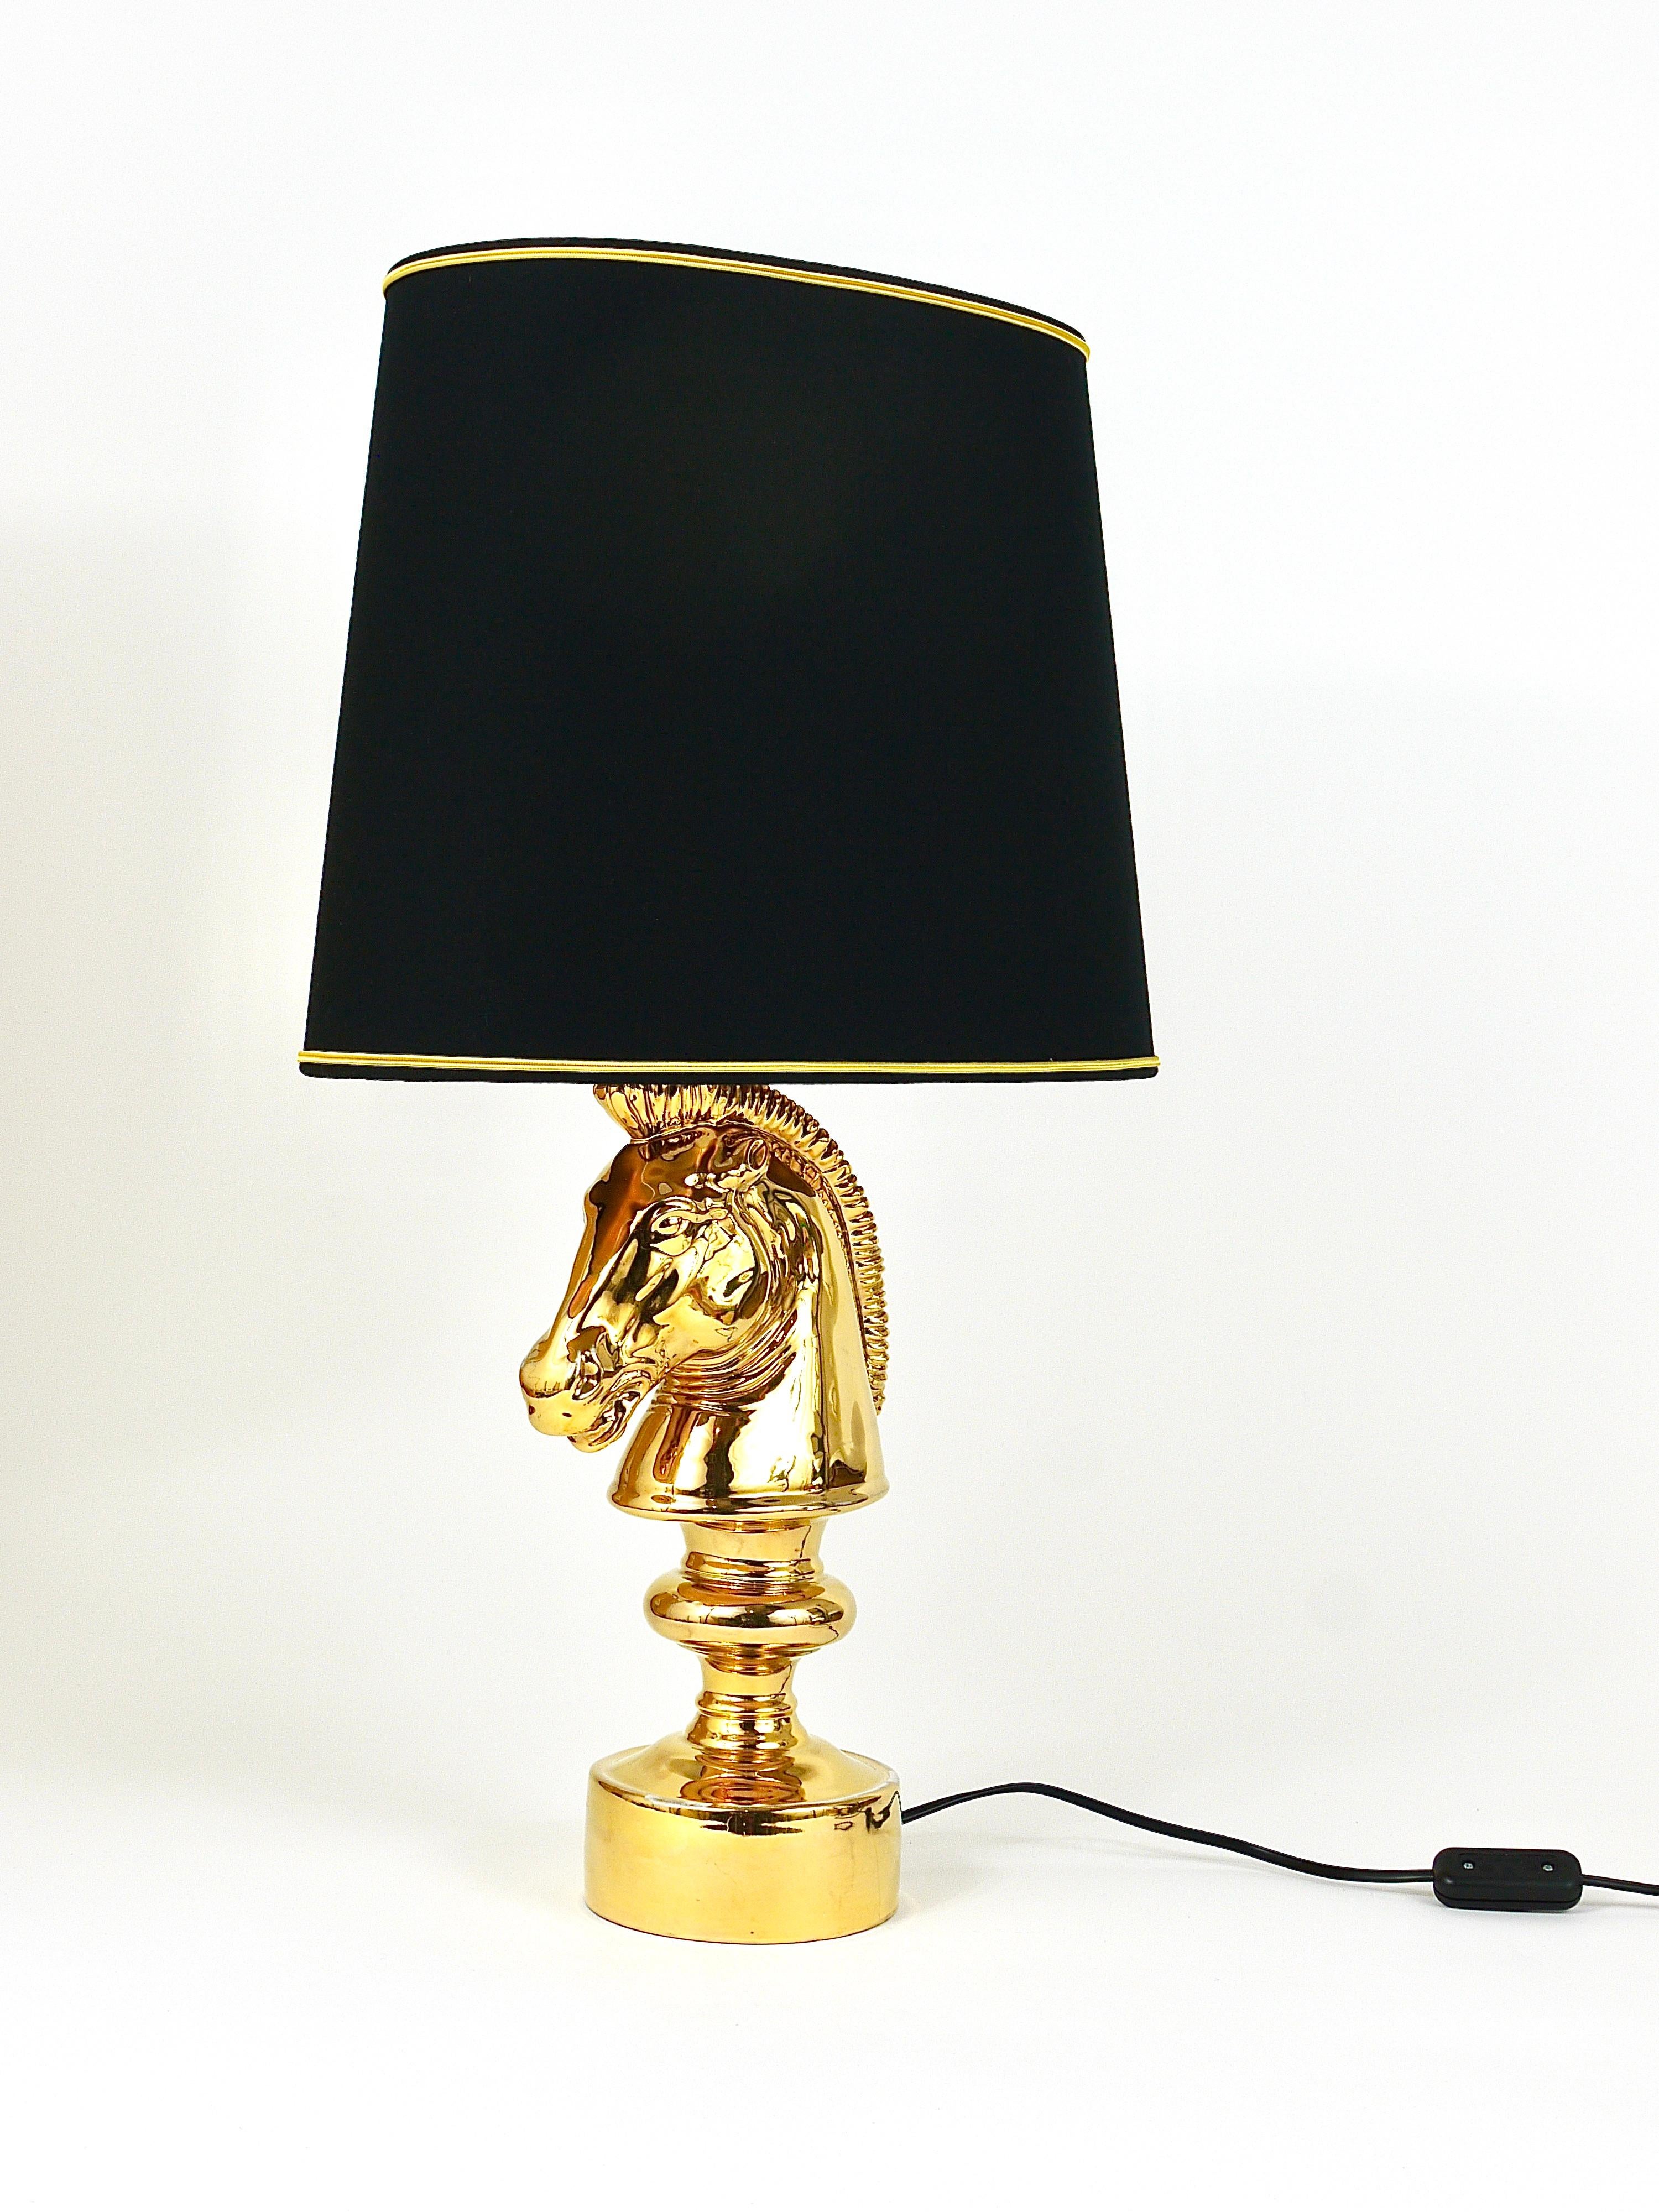 Golden Hollywood Regency Horse Sculpture Table or Side Lamp, Italy, 1970s For Sale 1